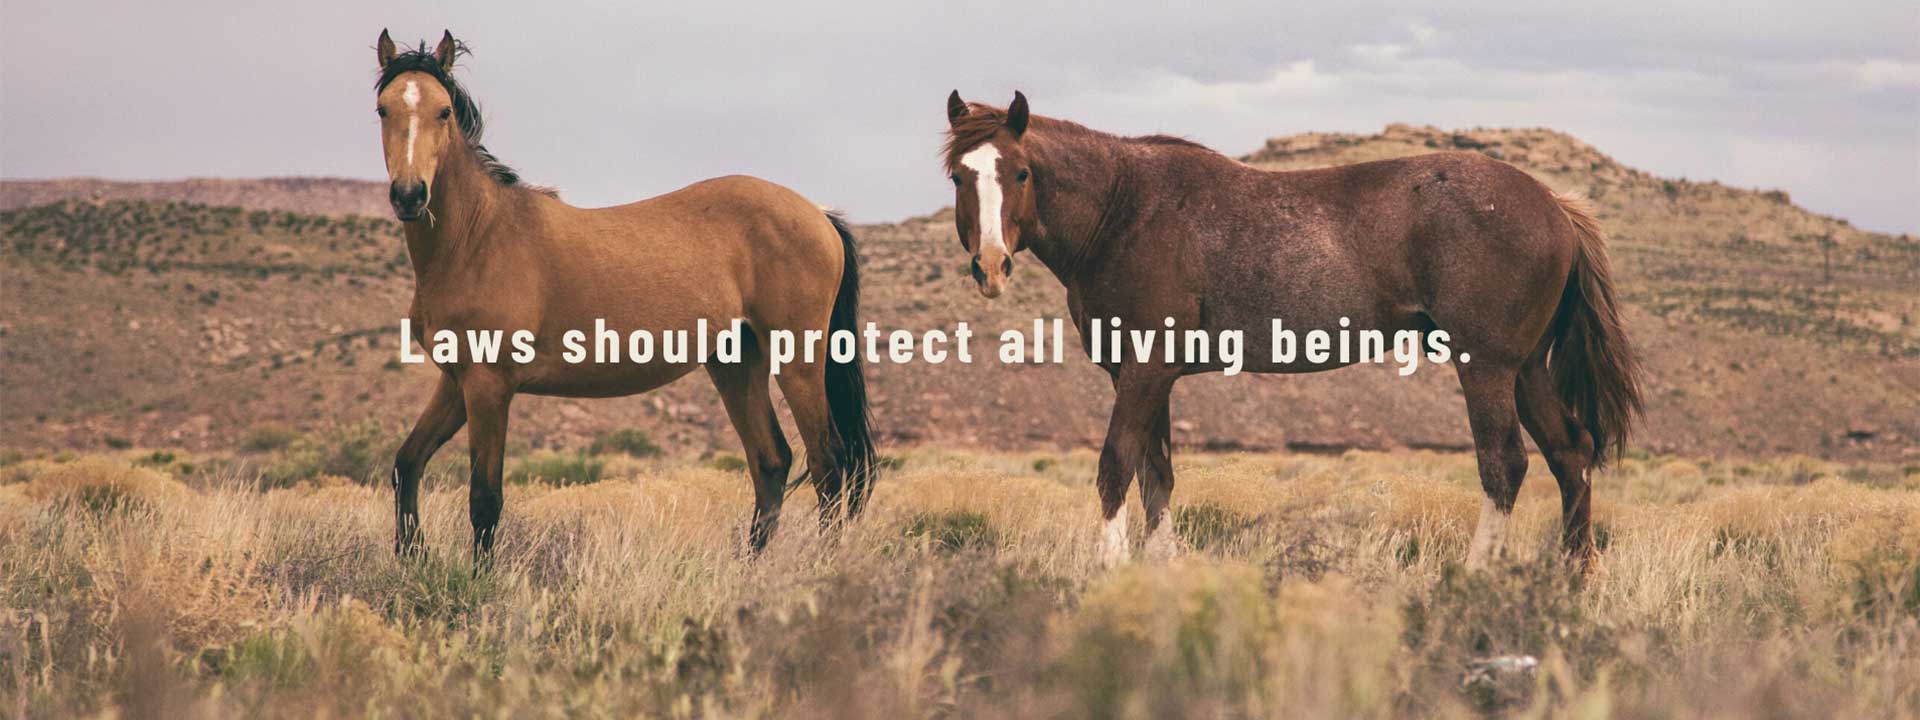 Laws should protect all living beings.